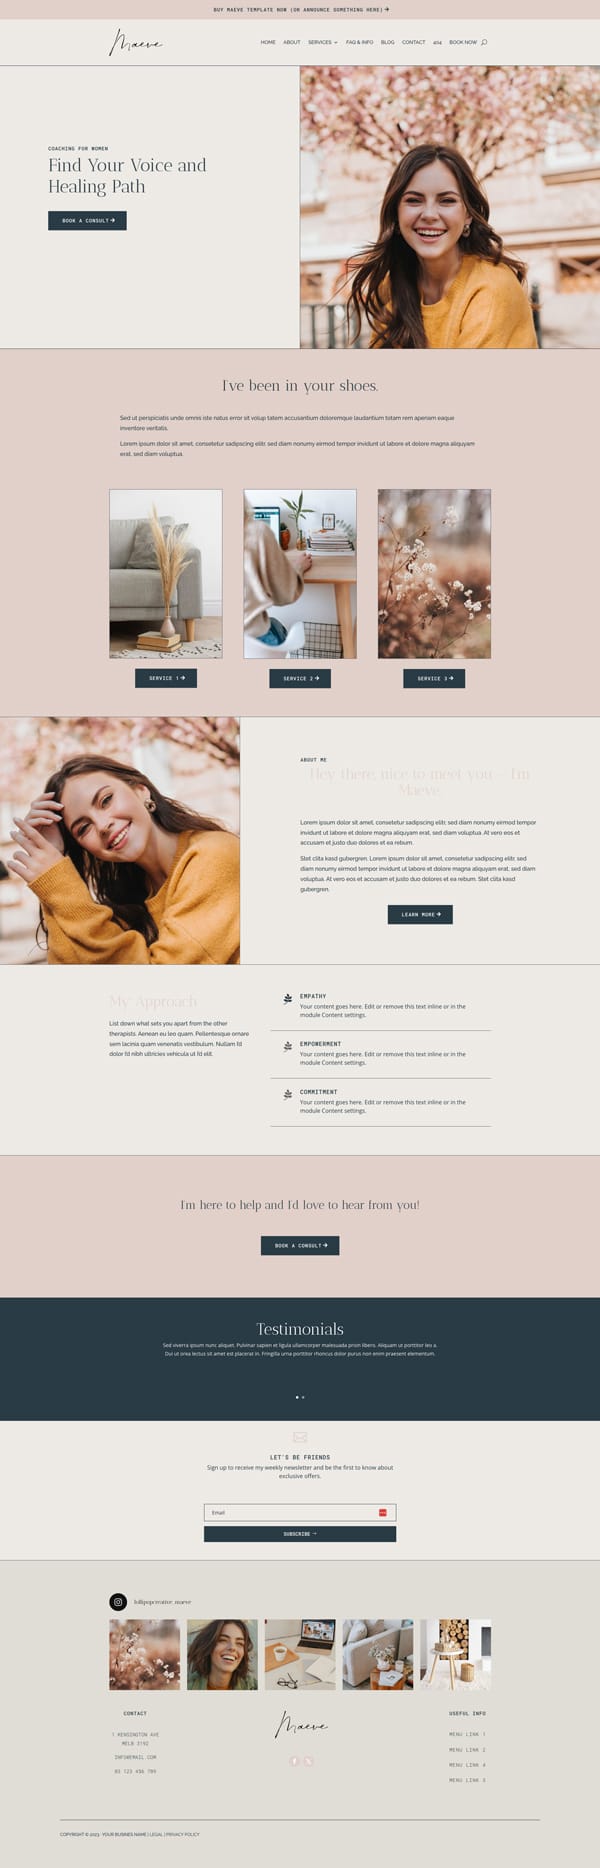 A website design for a therapist business.